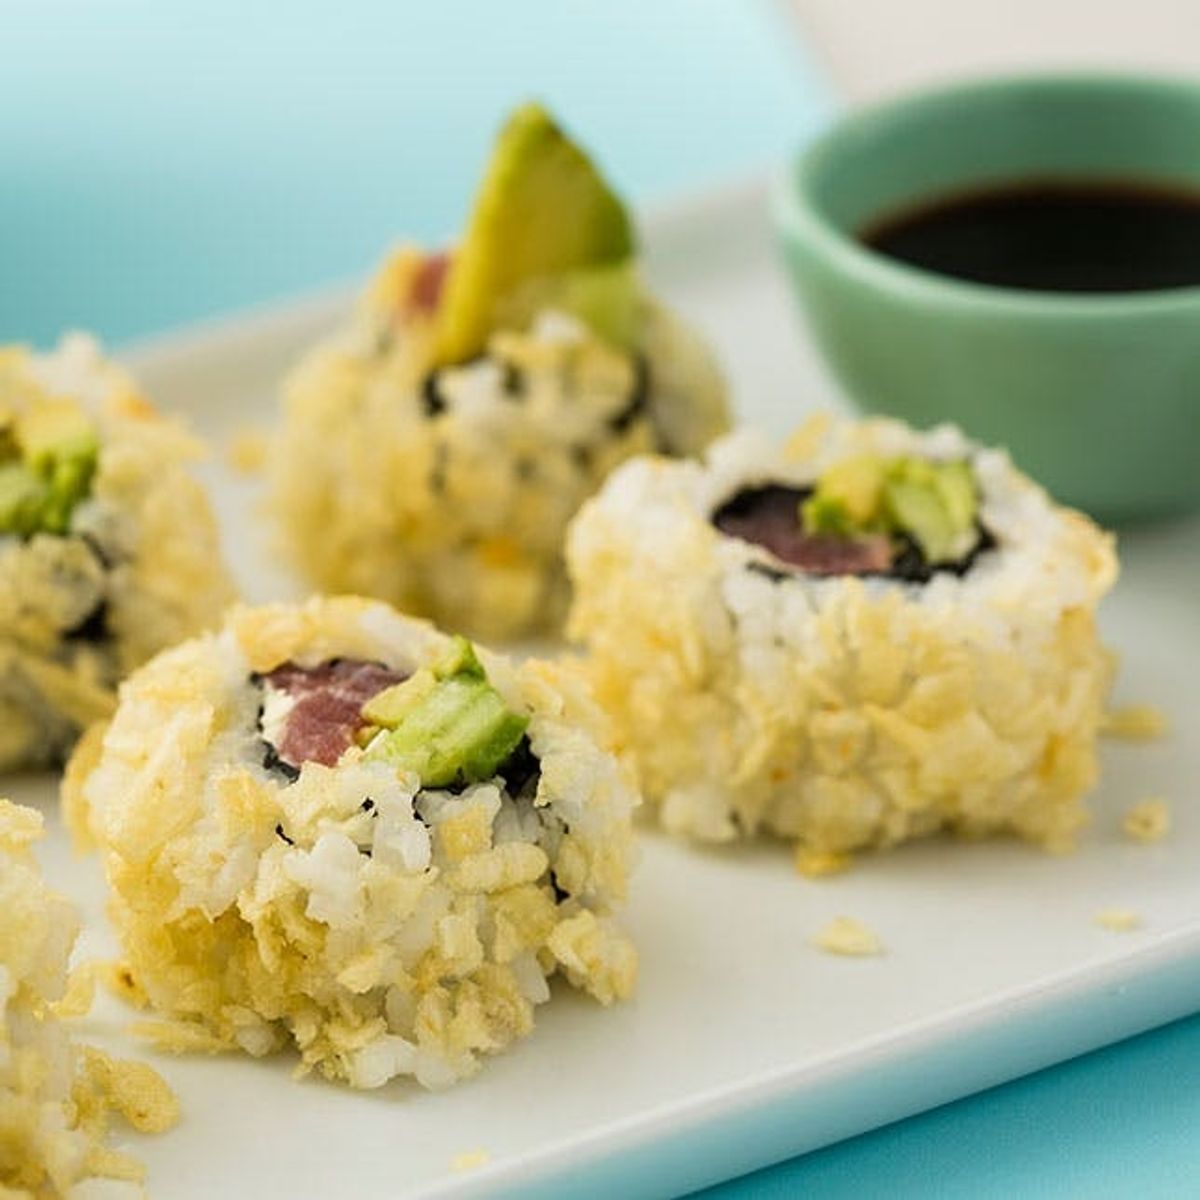 Learn How to Roll Your Own Sushi